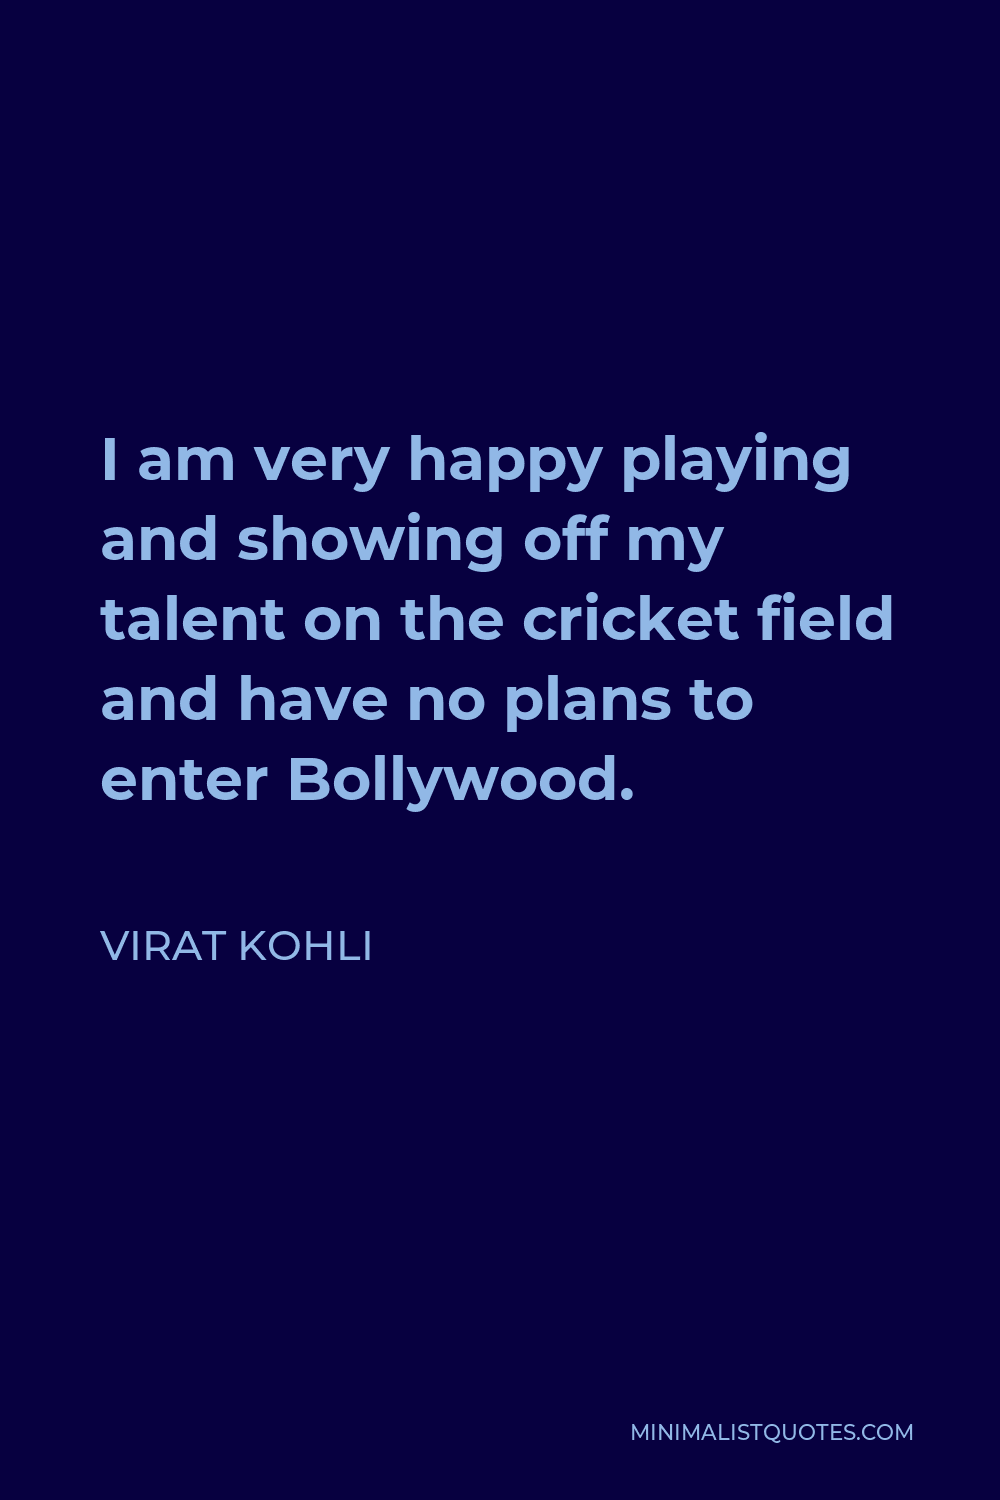 Virat Kohli Quote - I am very happy playing and showing off my talent on the cricket field and have no plans to enter Bollywood.